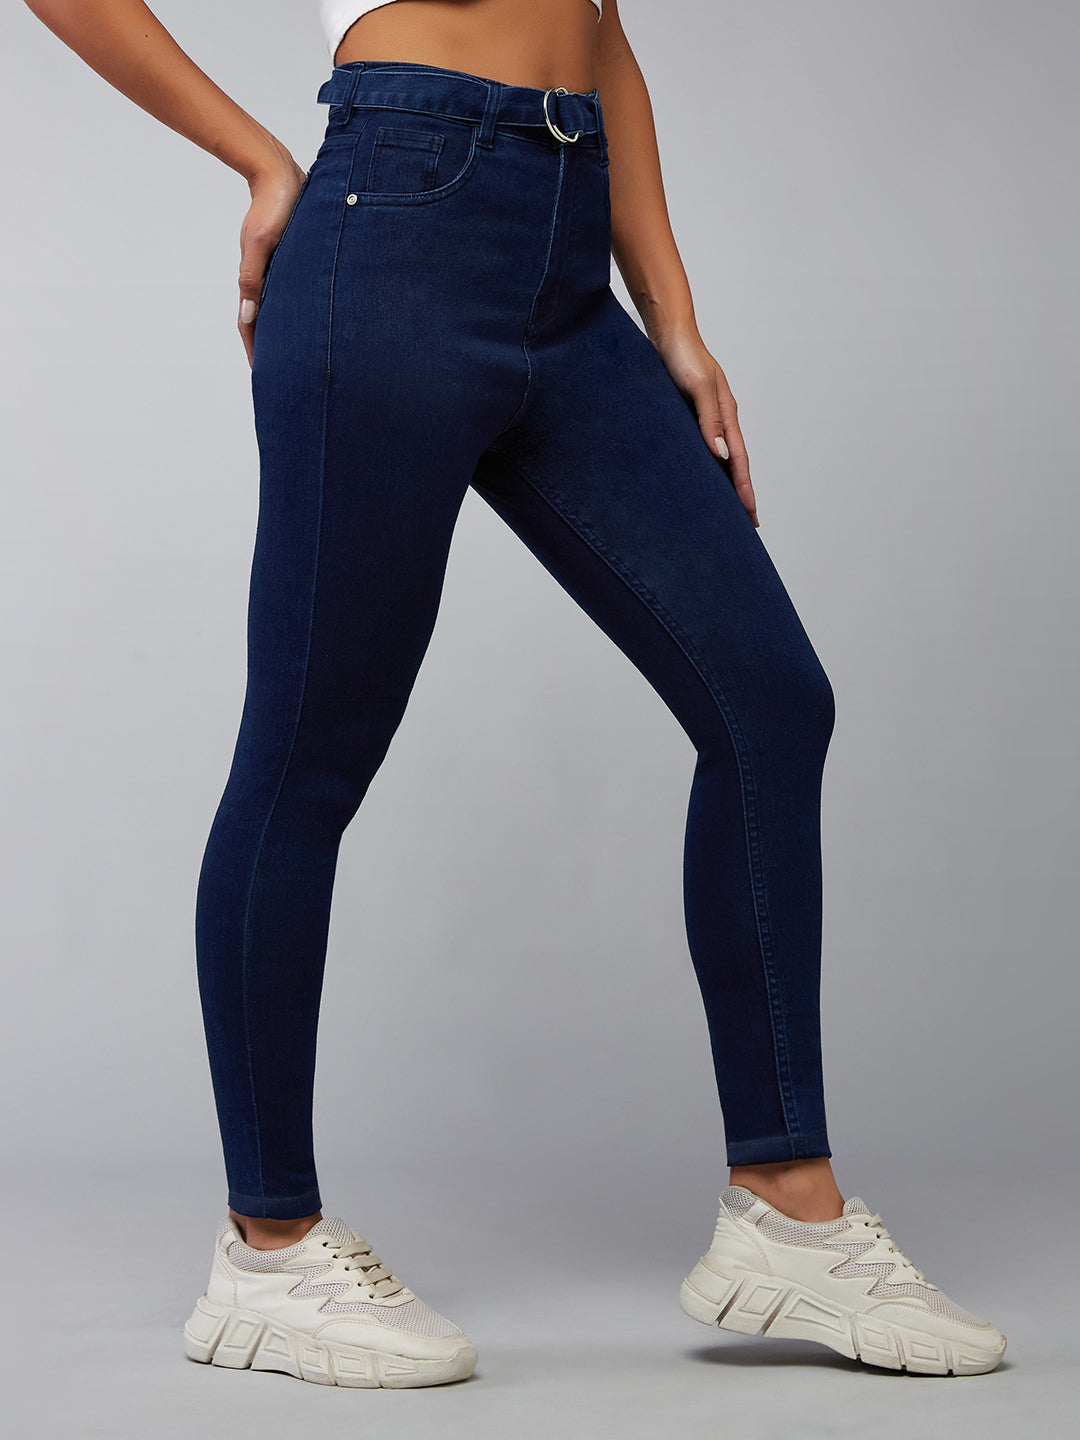 Women's Navy Blue Cotton Skinny Fit Relaxed High Rise Regular Length Stretchable Denim Jeans